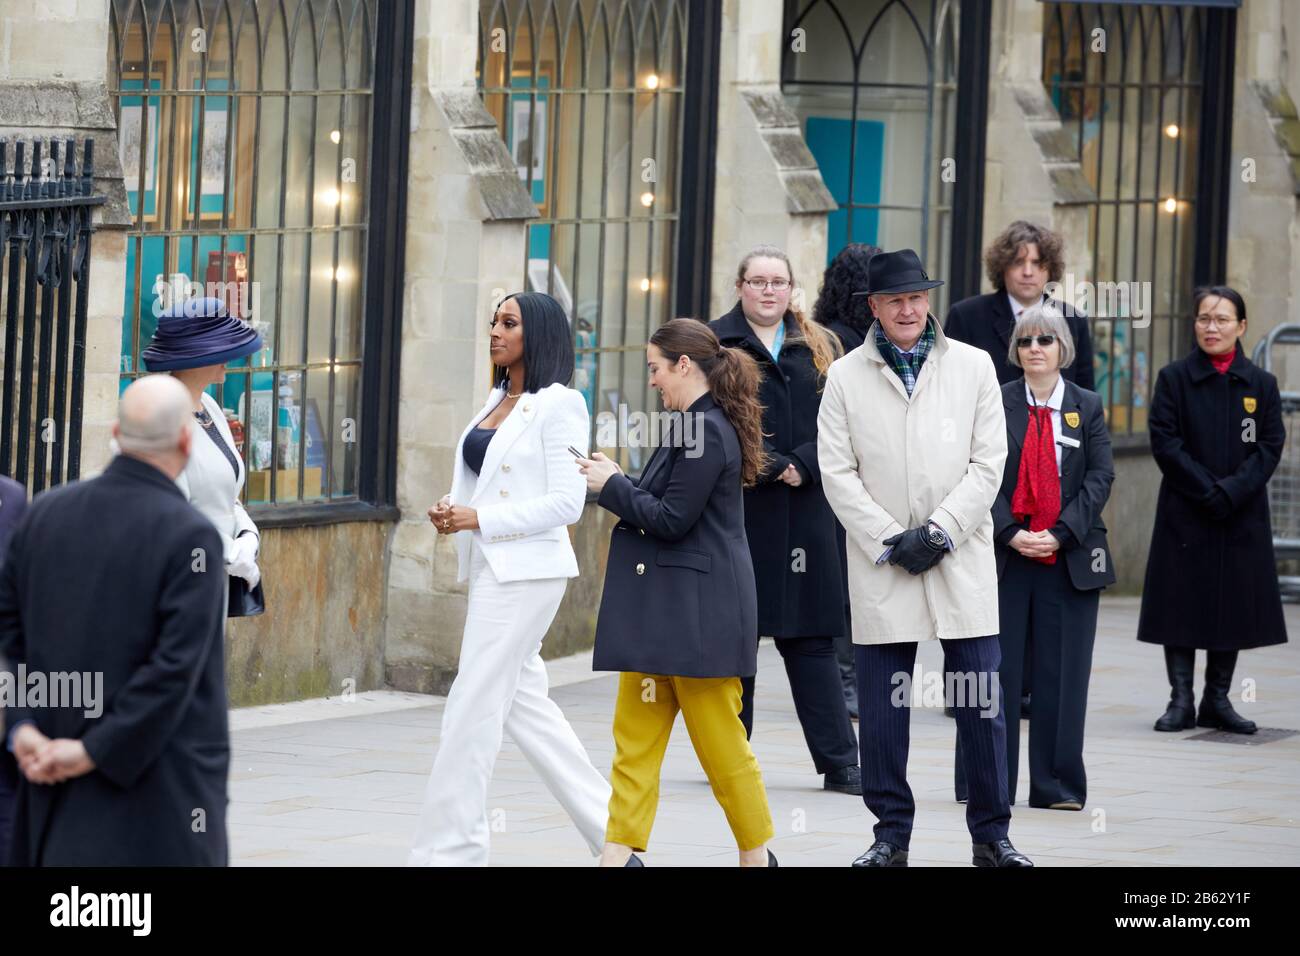 London, U.K. - 9 Mar 2020: Singer Alexandra Burke (3rd left, dressed in white) arriving for the Commonwealth Day Service at Westminster Abbey. Stock Photo